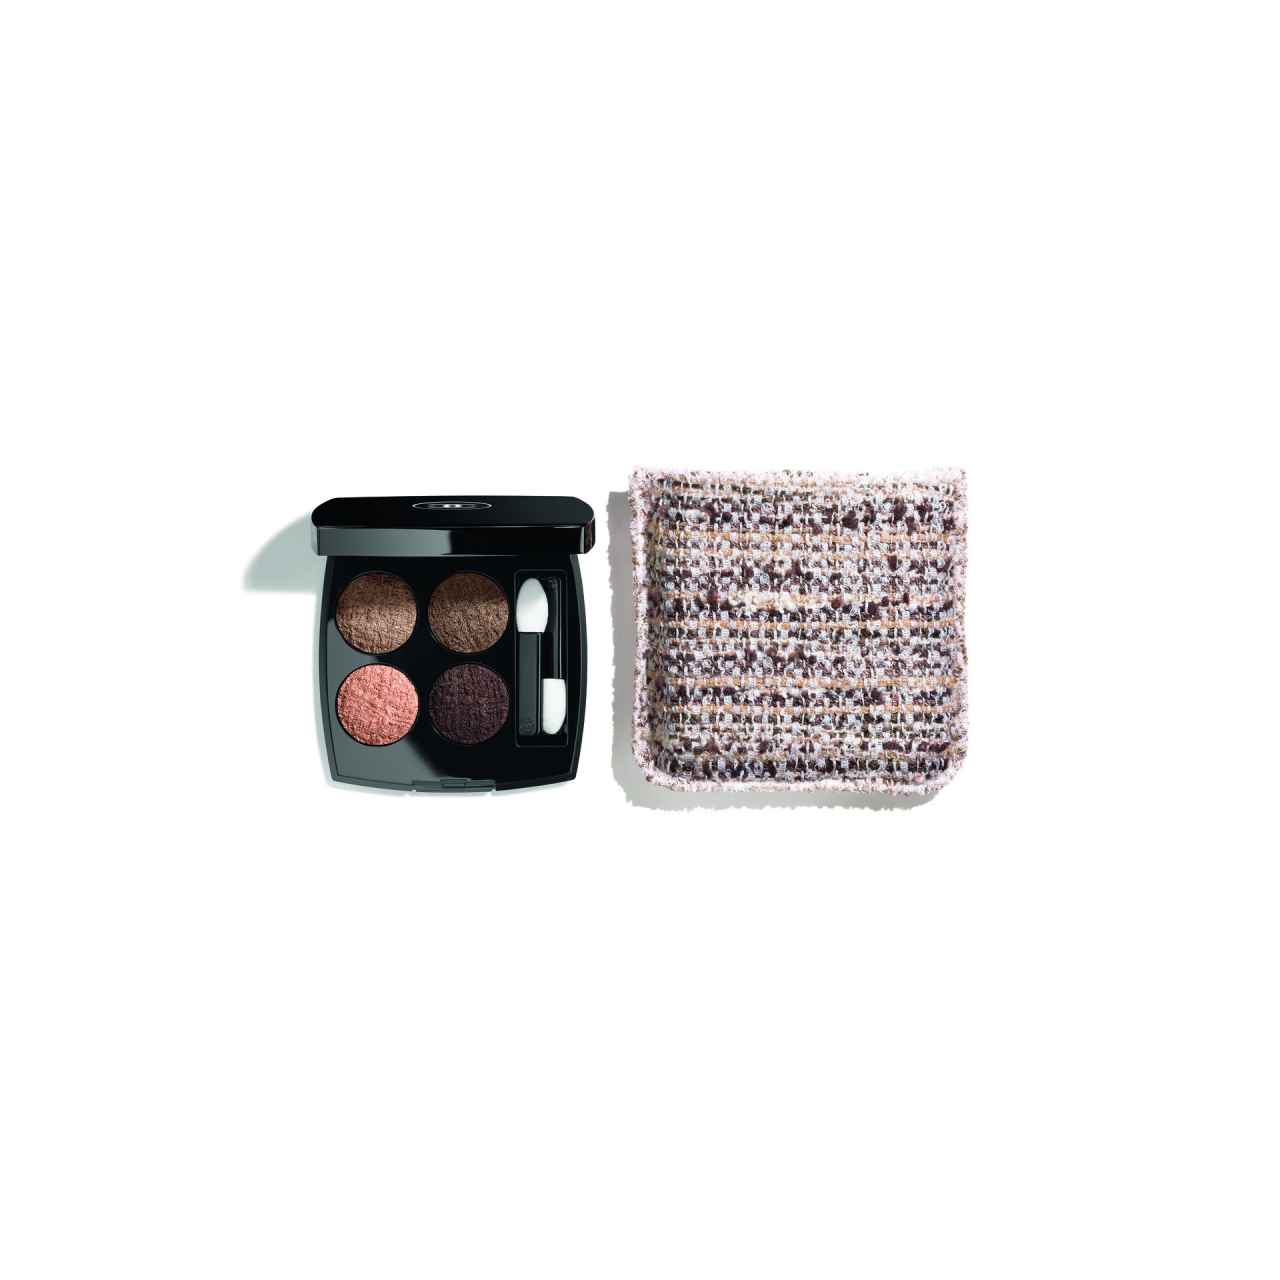 Les 4 Ombres Tweed, by Chanel (€78).